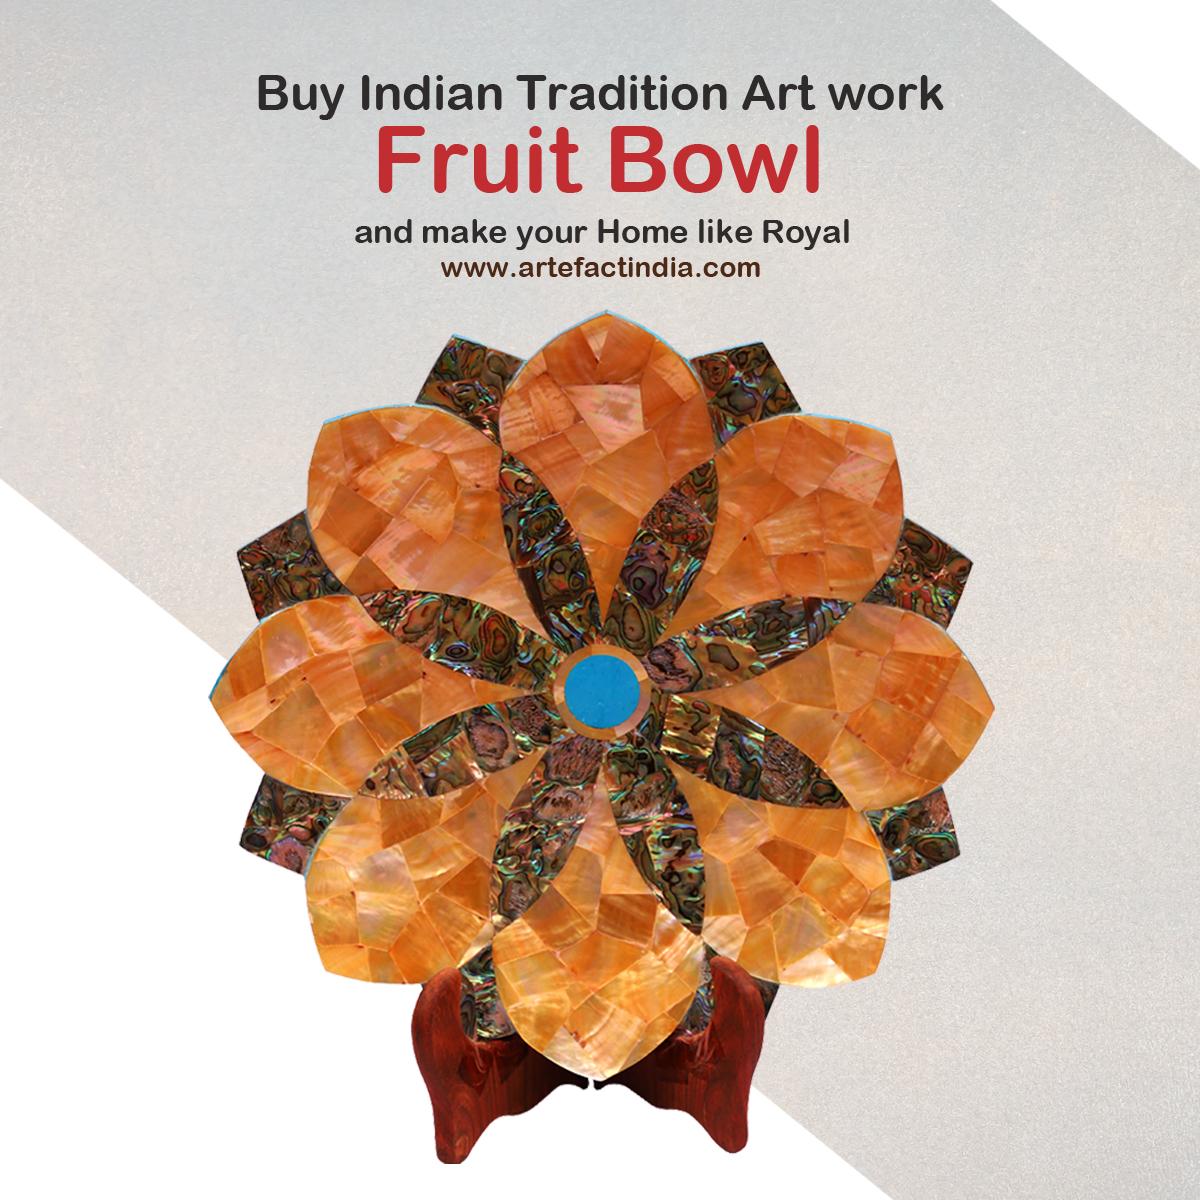 Buy Indian Tradition Artwork Fruit Bowl and make your Home like Royal